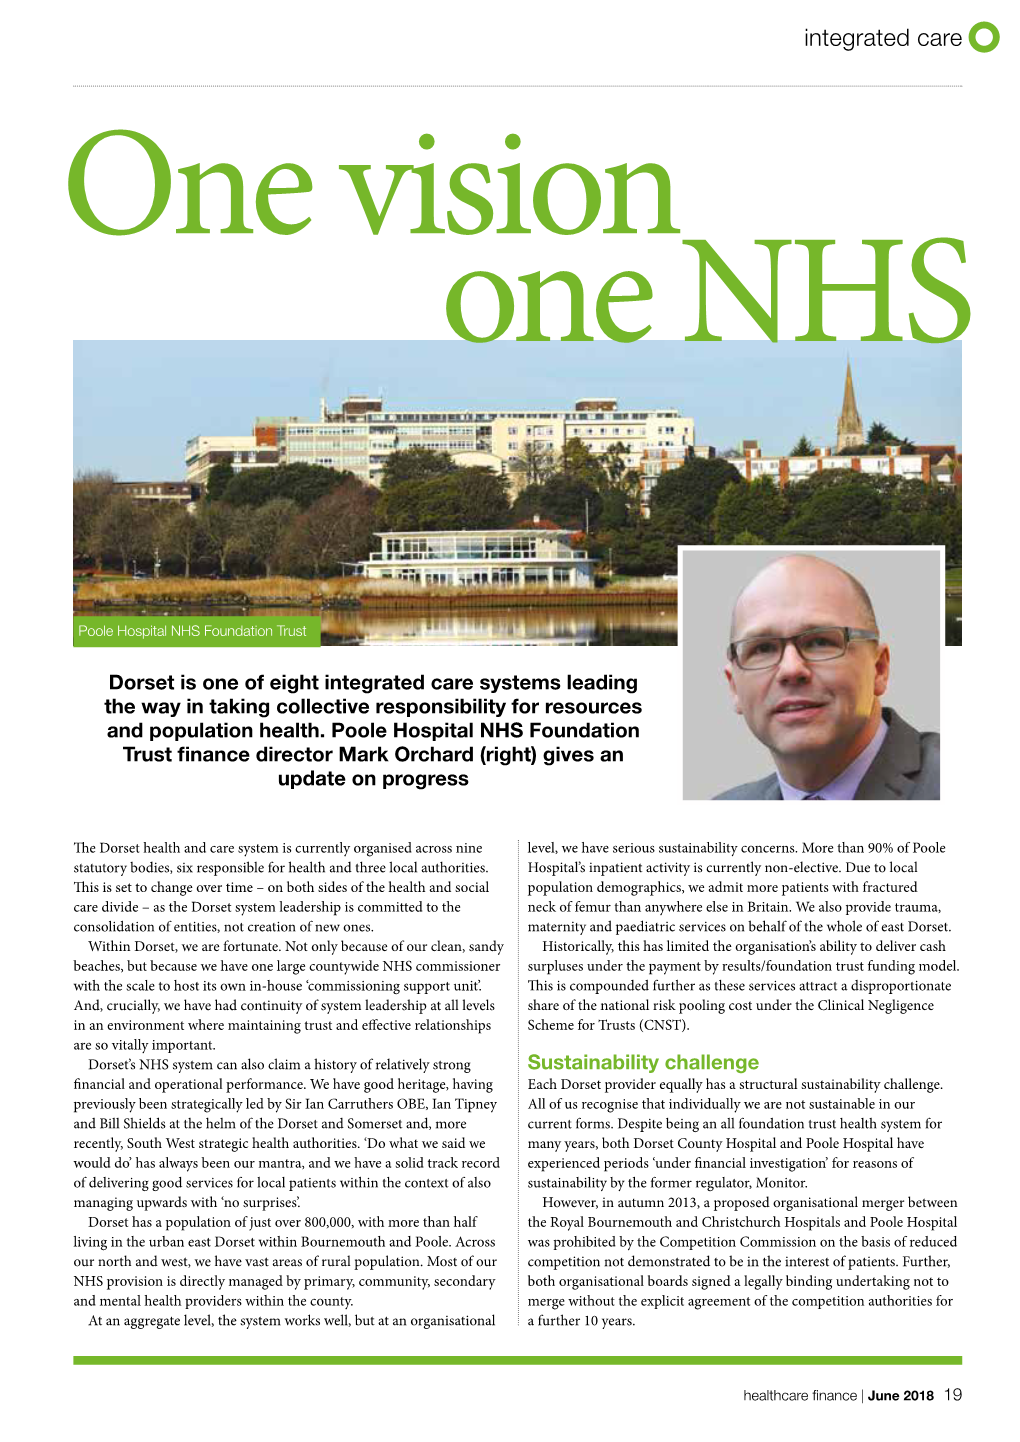 Integrated Care One Vision One NHS